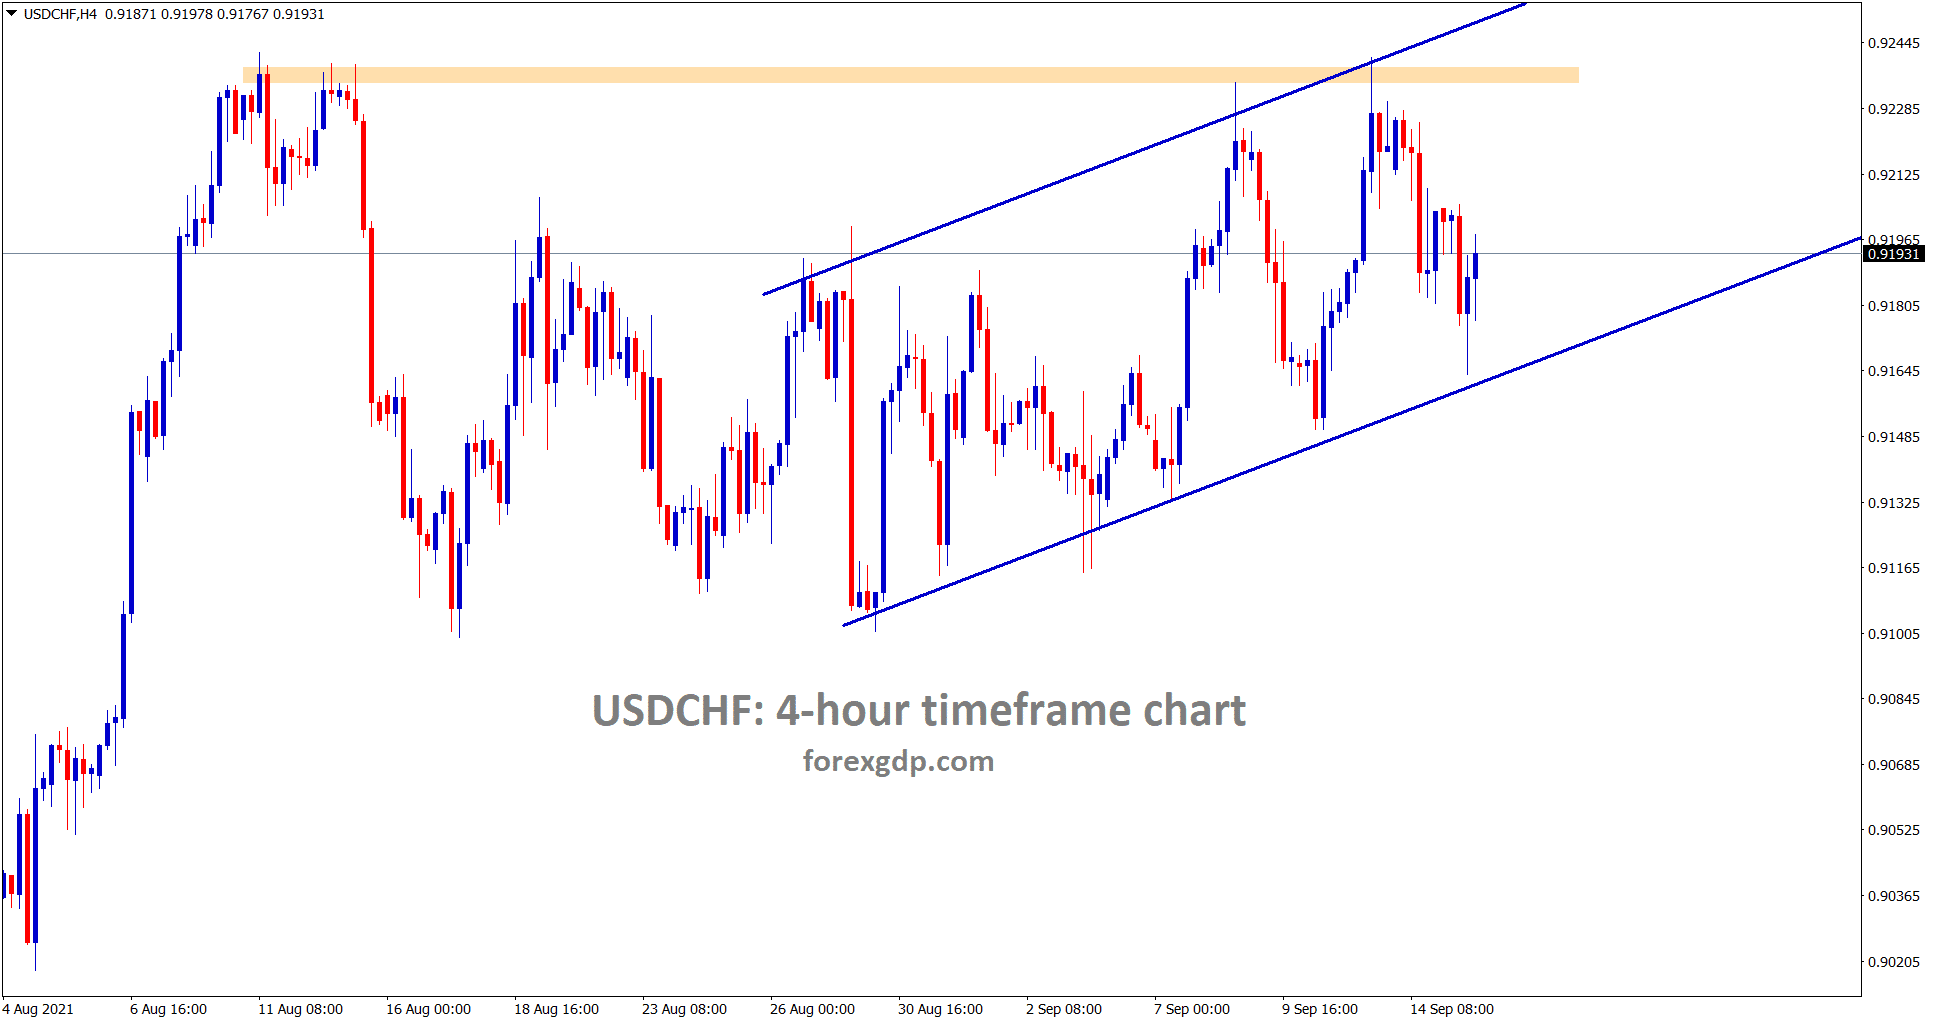 USDCHF is moving in an Ascending channel range